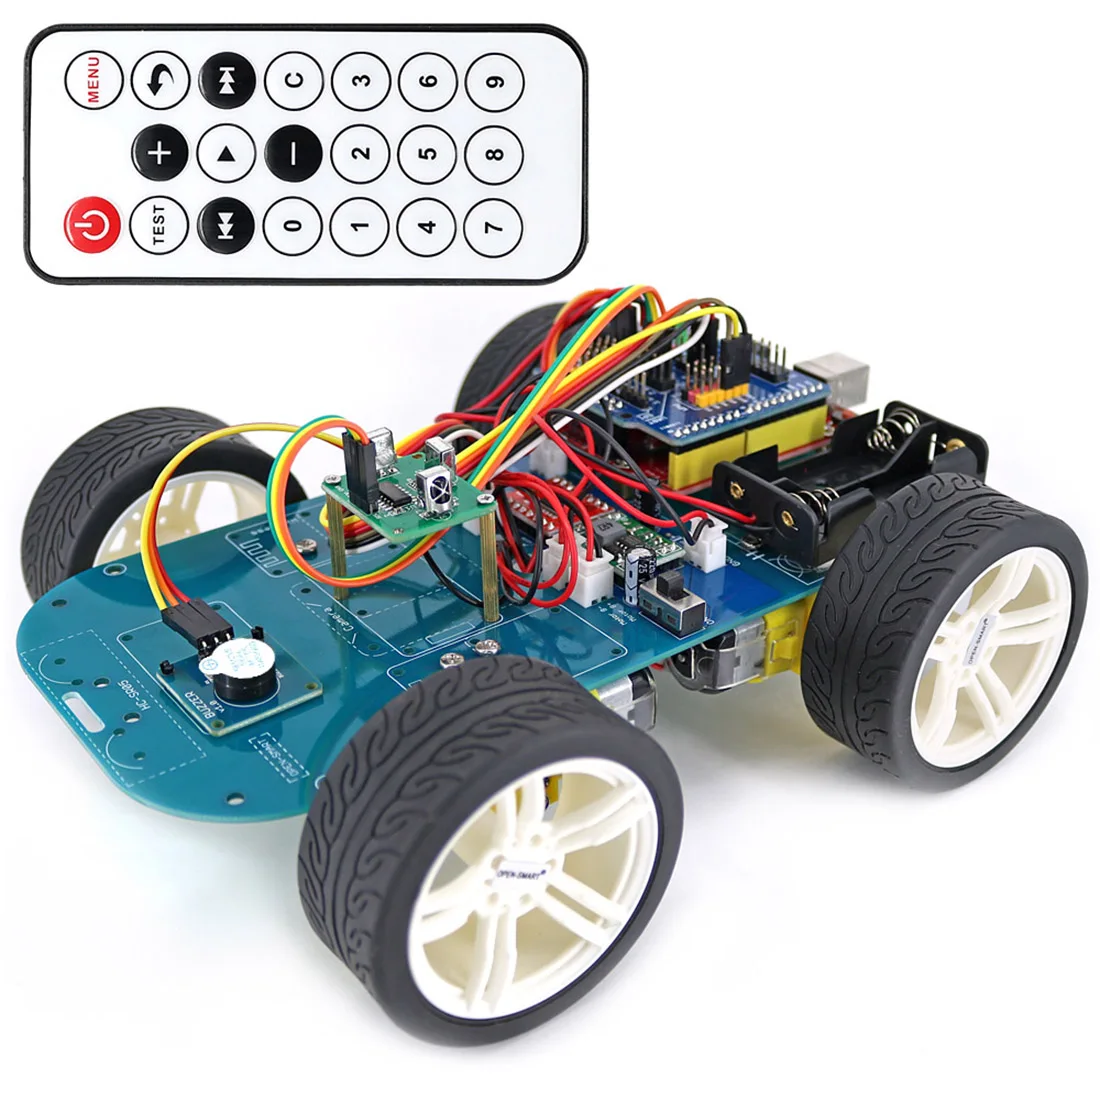 

High Tech Programmable Robot Car Toy 4WD Wireless IR Remote Control Smart Car Kit with Tutorial for Arduino for R3 Nano